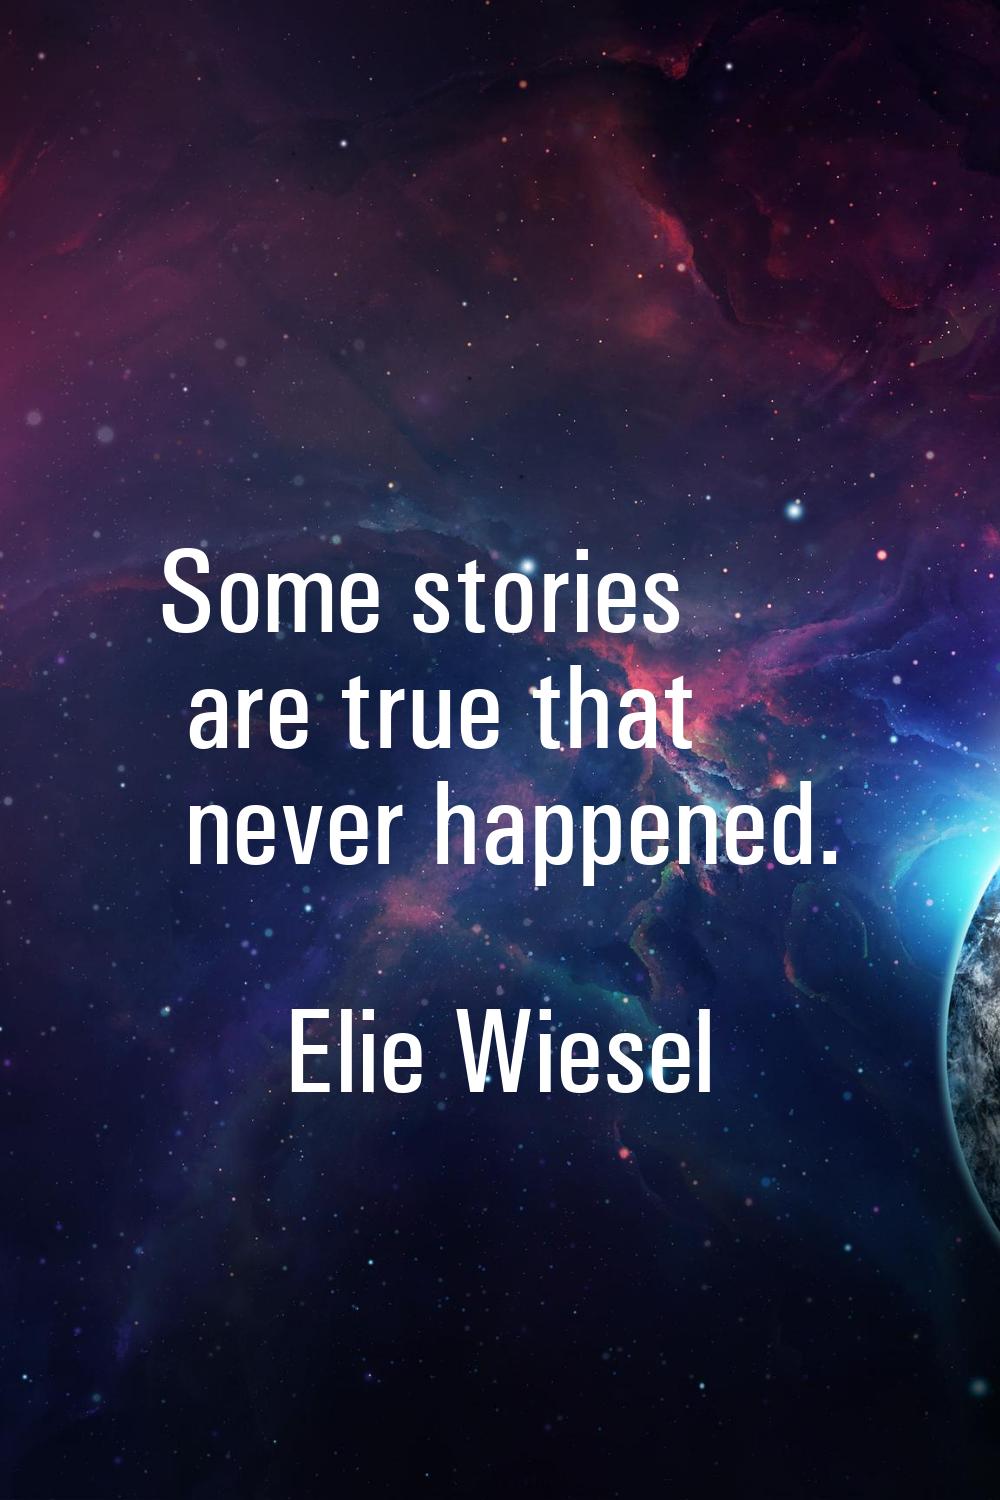 Some stories are true that never happened.